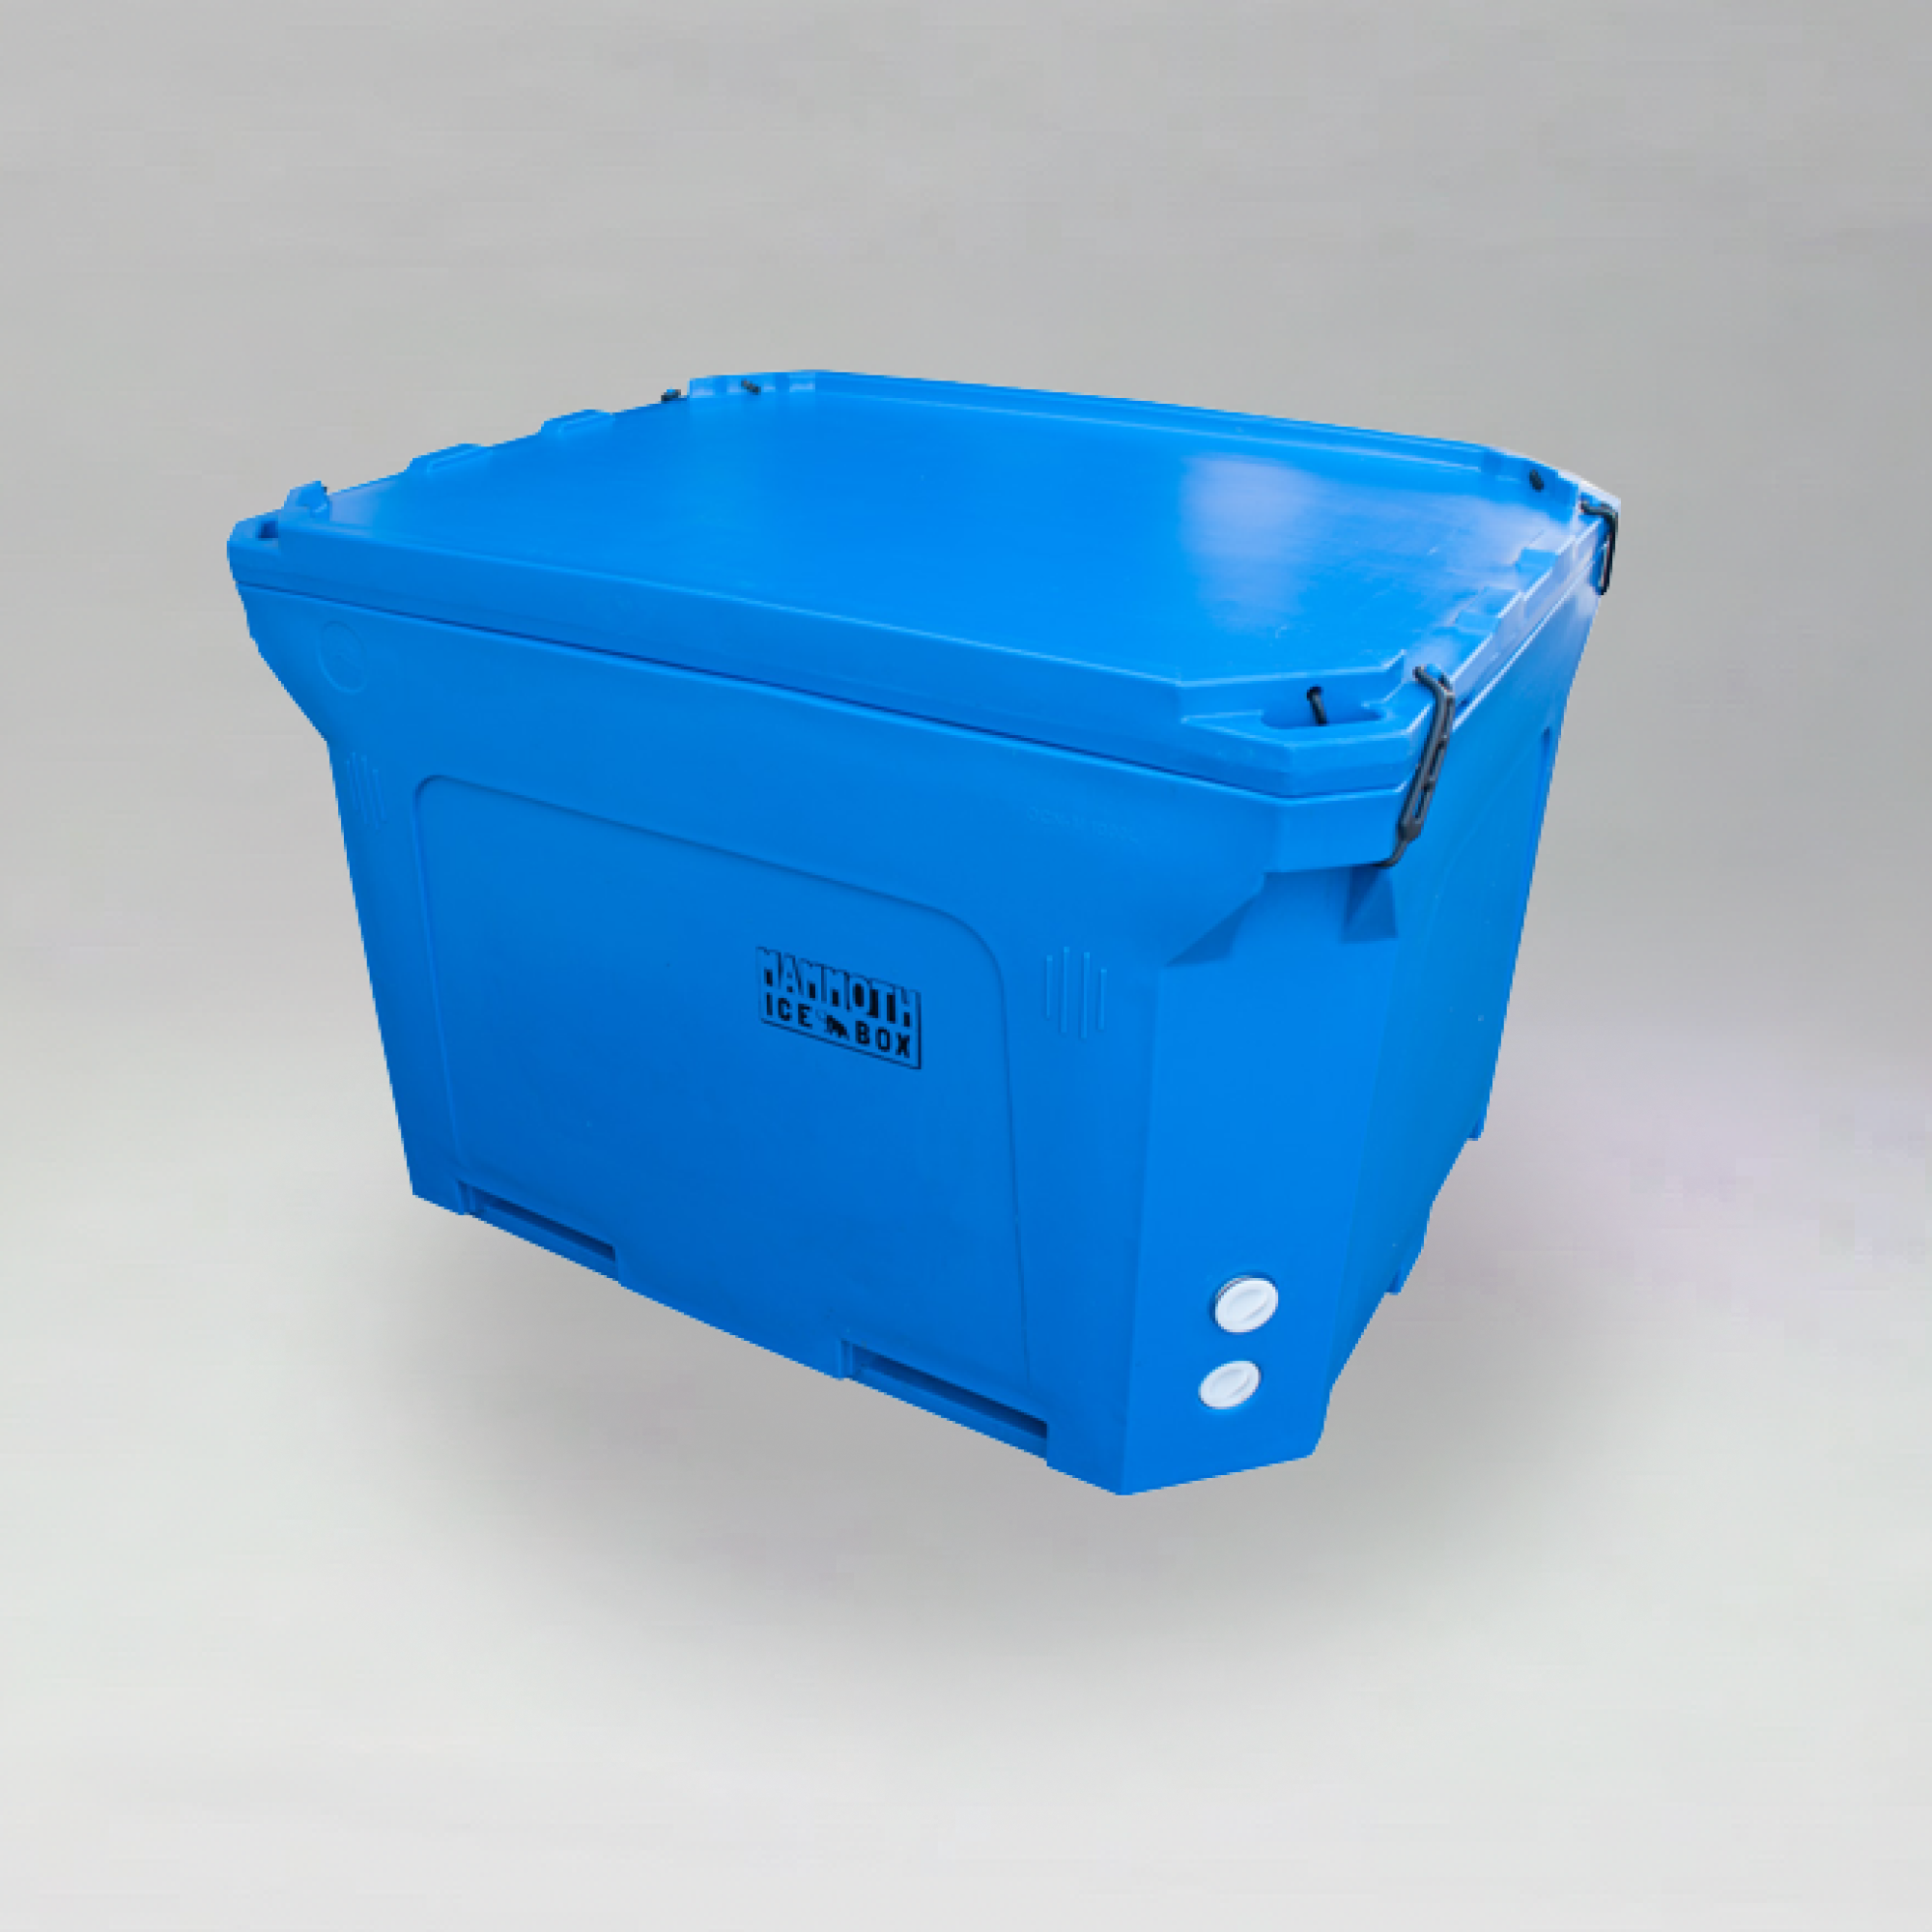 Mammoth Ice Bin - 1000 Litre (SOLD OUT)